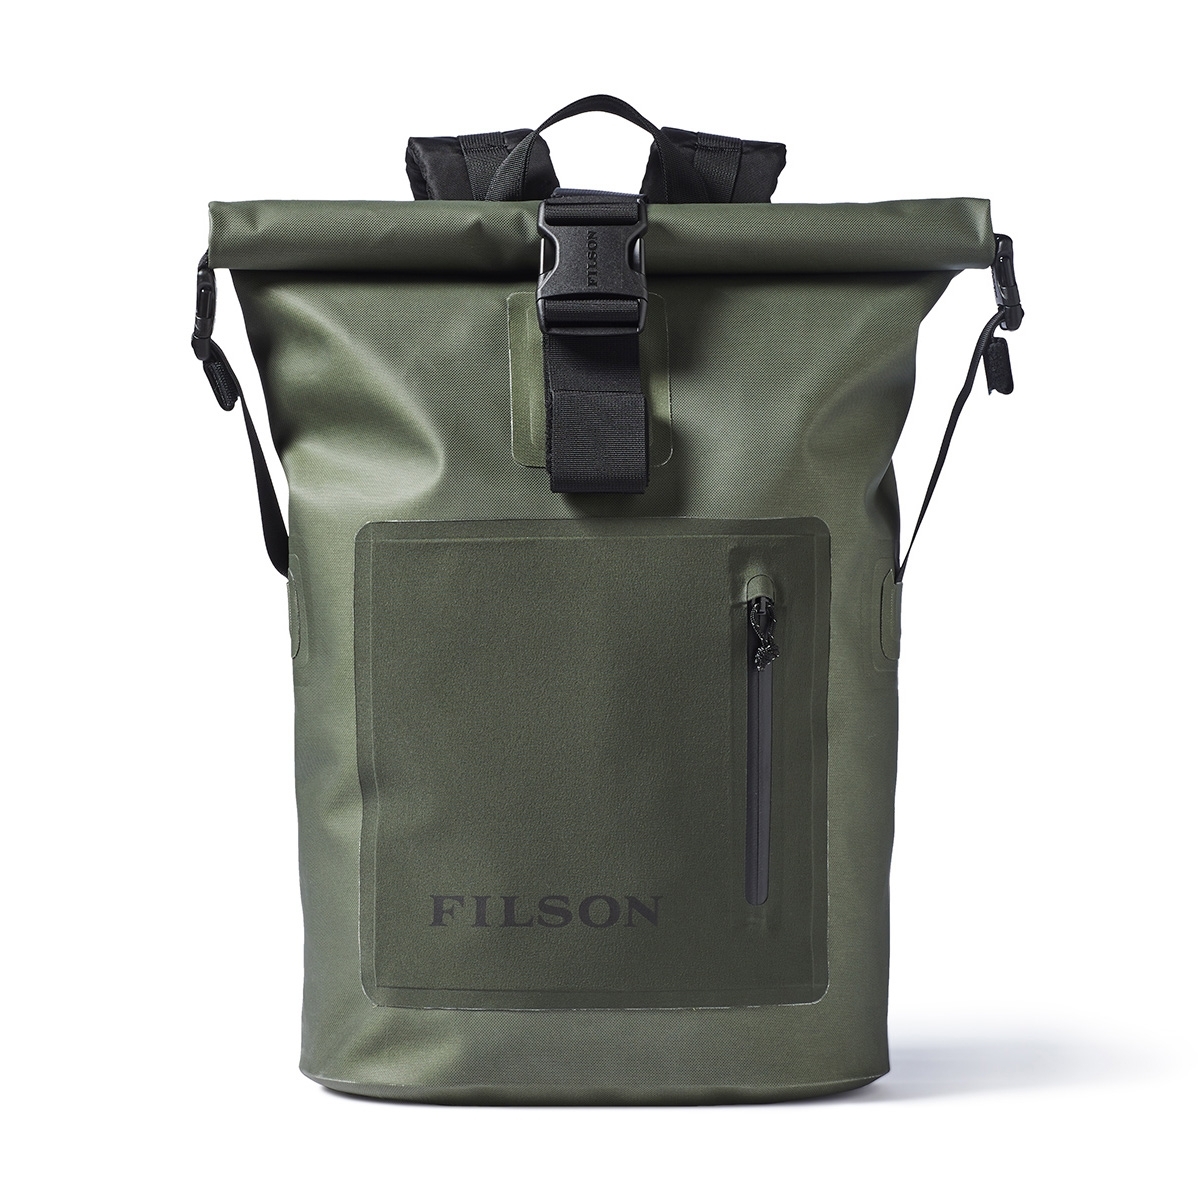 Filson Dry Backpack 20067743-Green keeps your gear dry in any weather